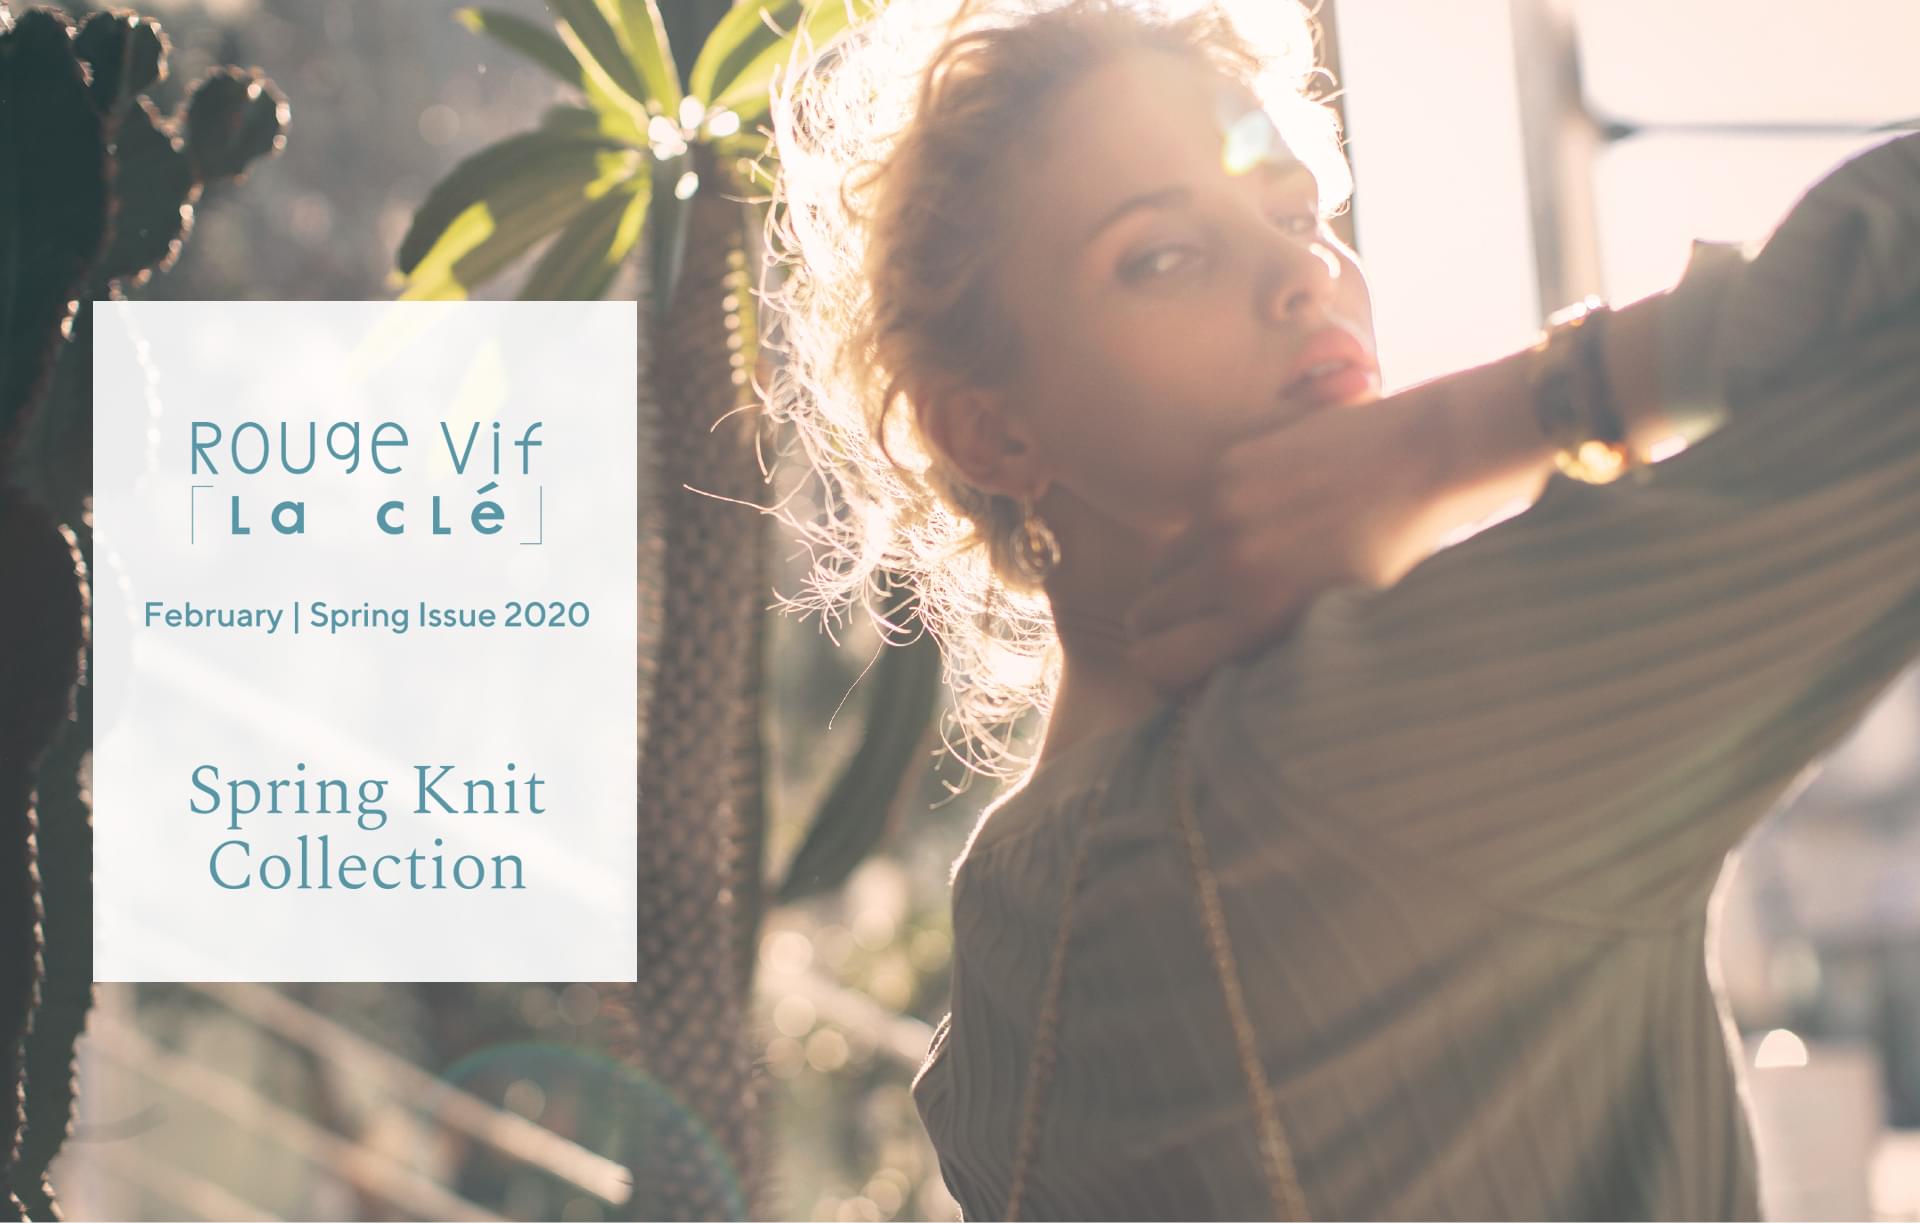 Spring Knit Collection -春ニットの着こなし- Rouve vif la cle